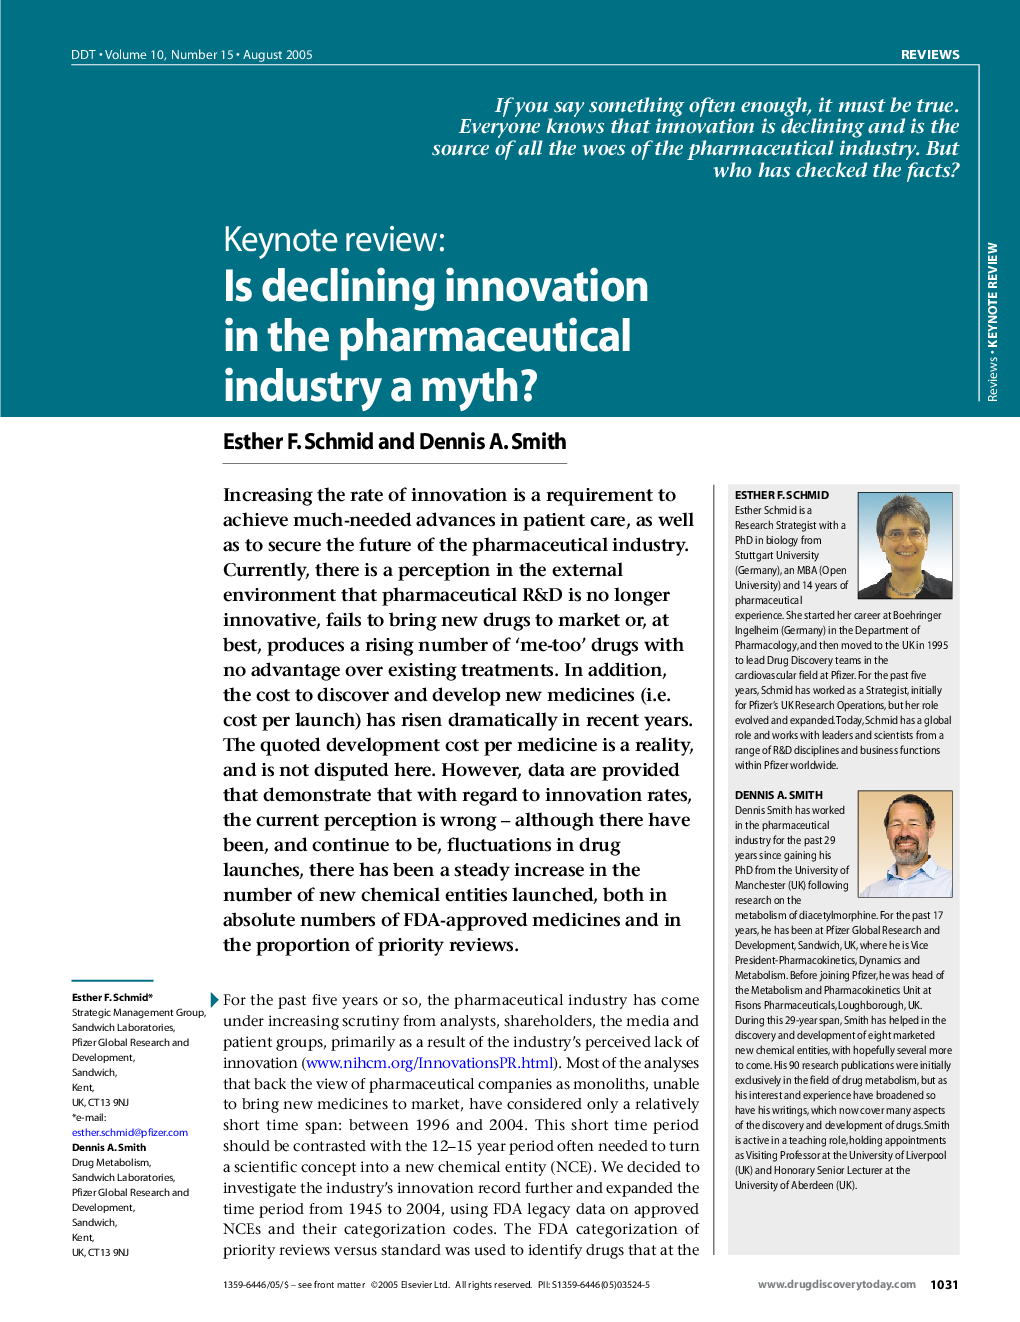 Keynote review: Is declining innovation in the pharmaceutical industry a myth?